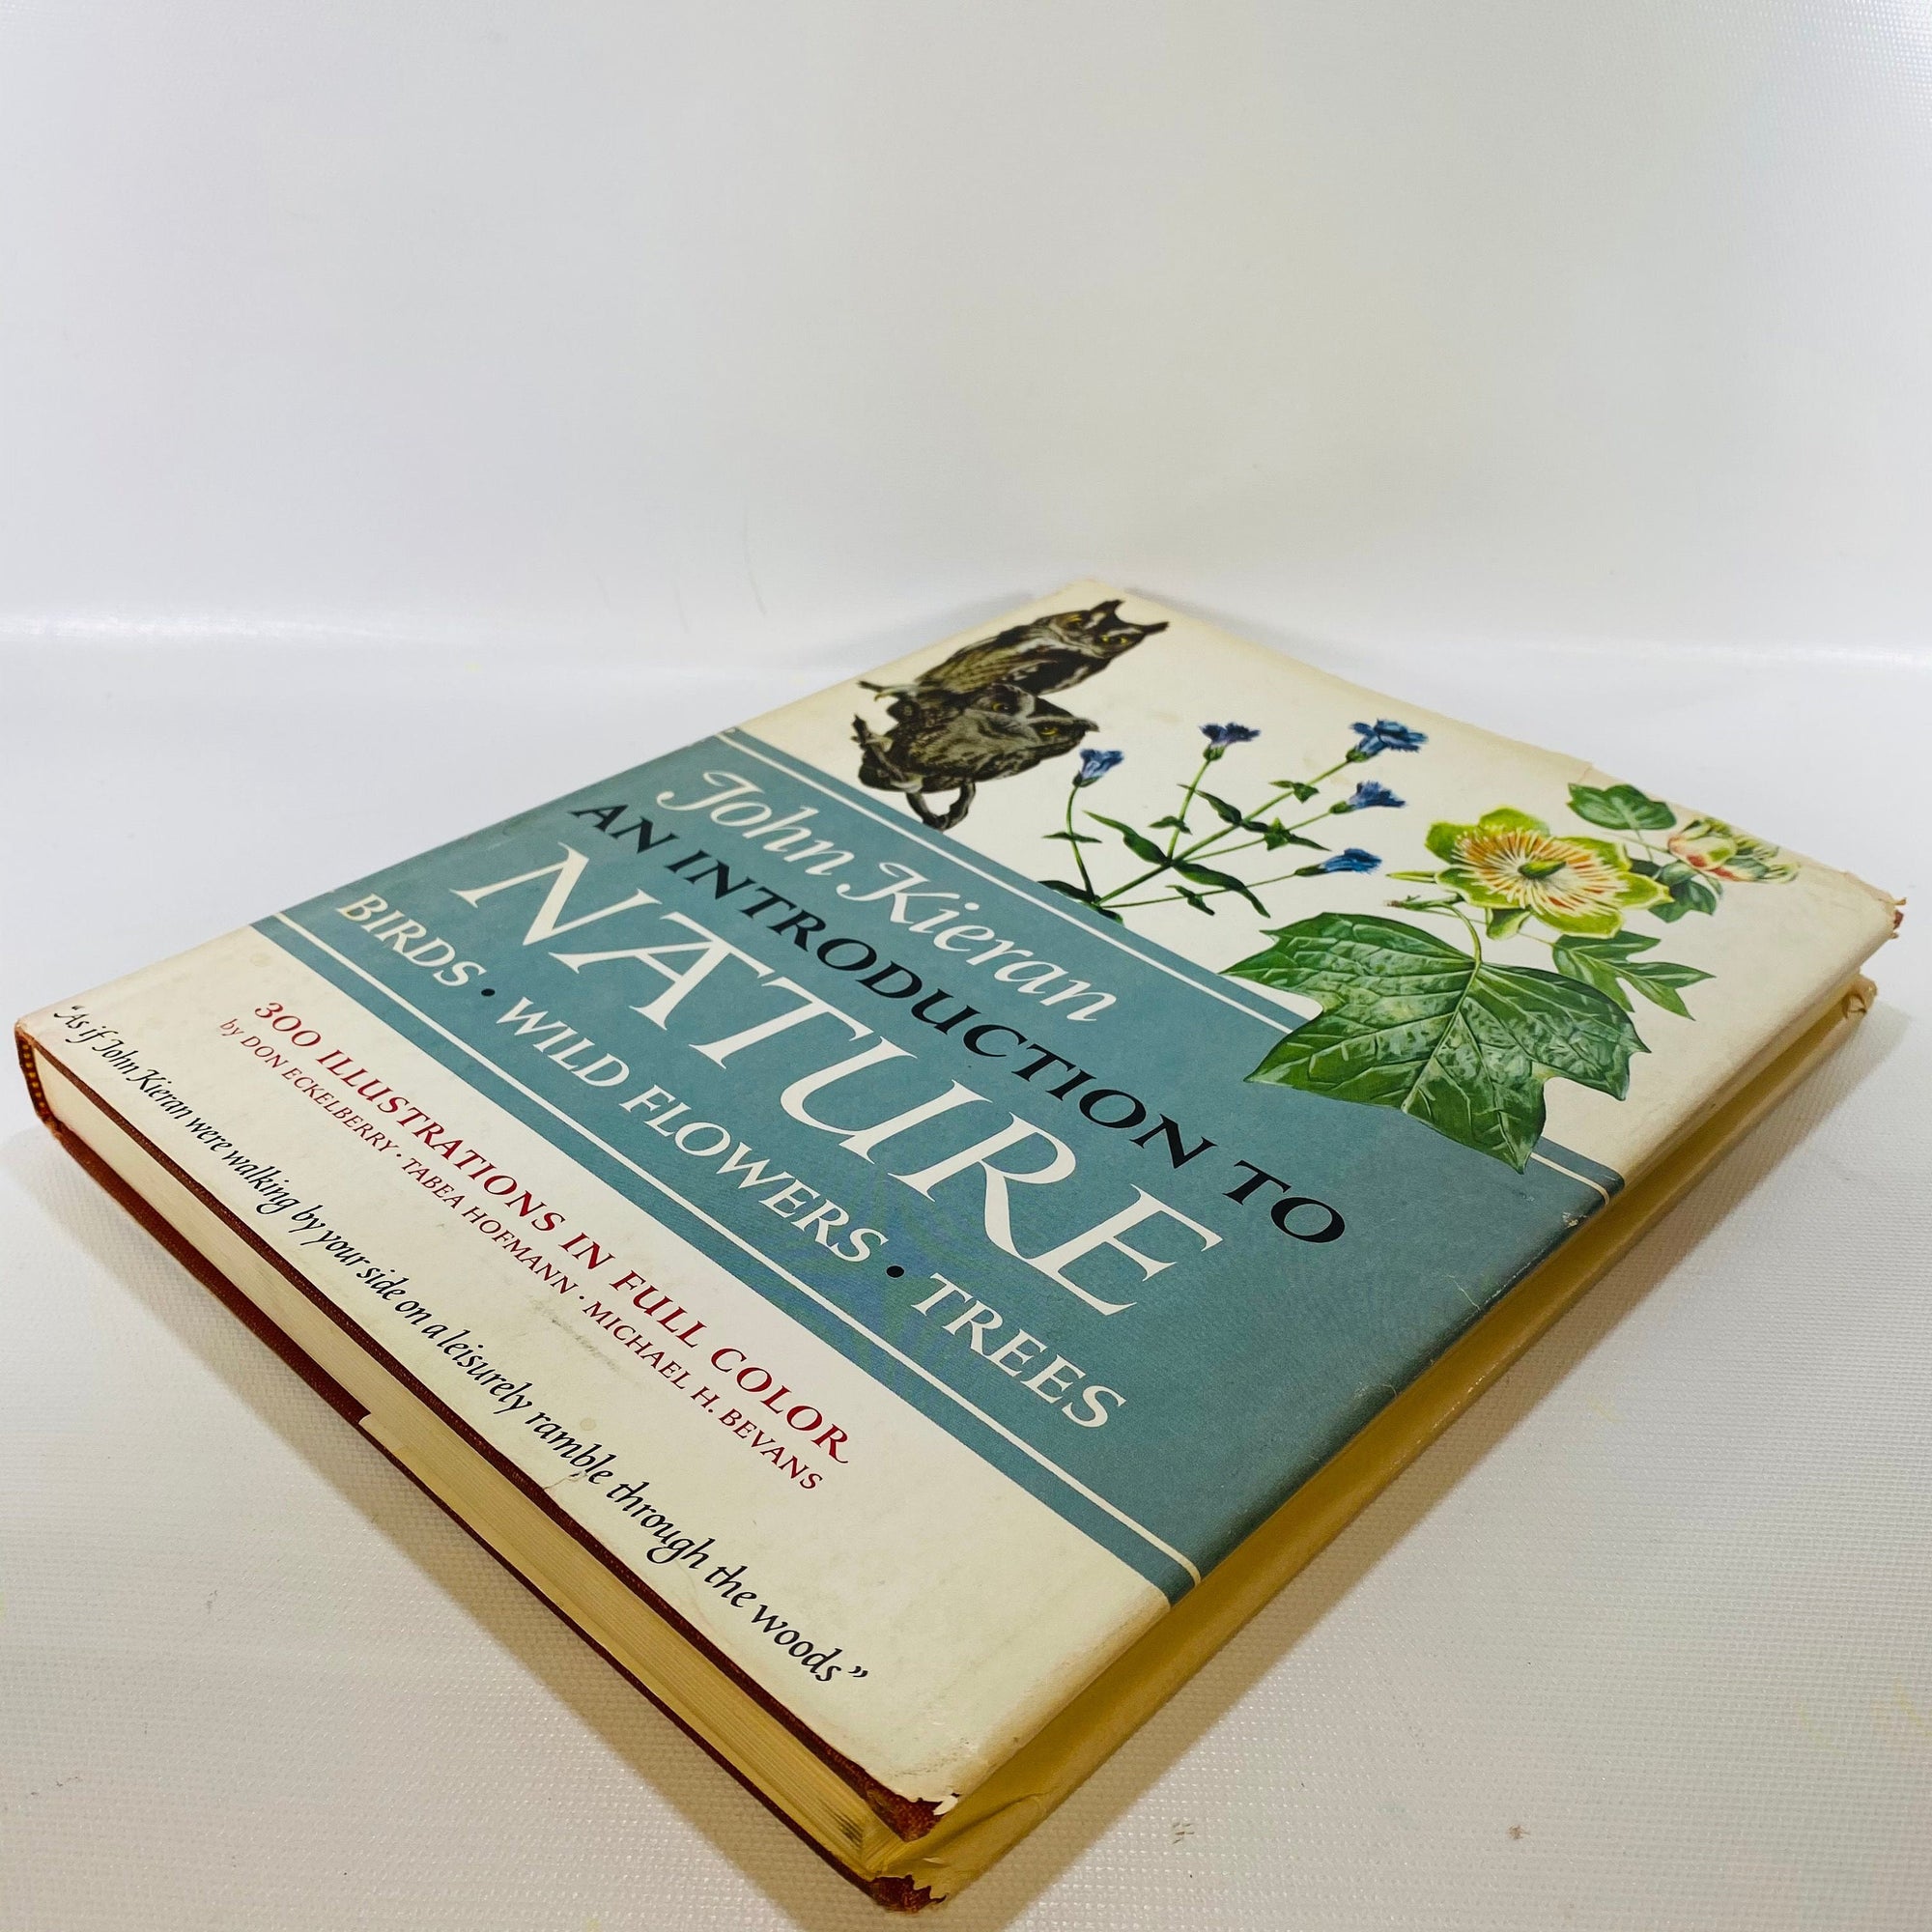 An Introduction to Nature by John Kieran 1966